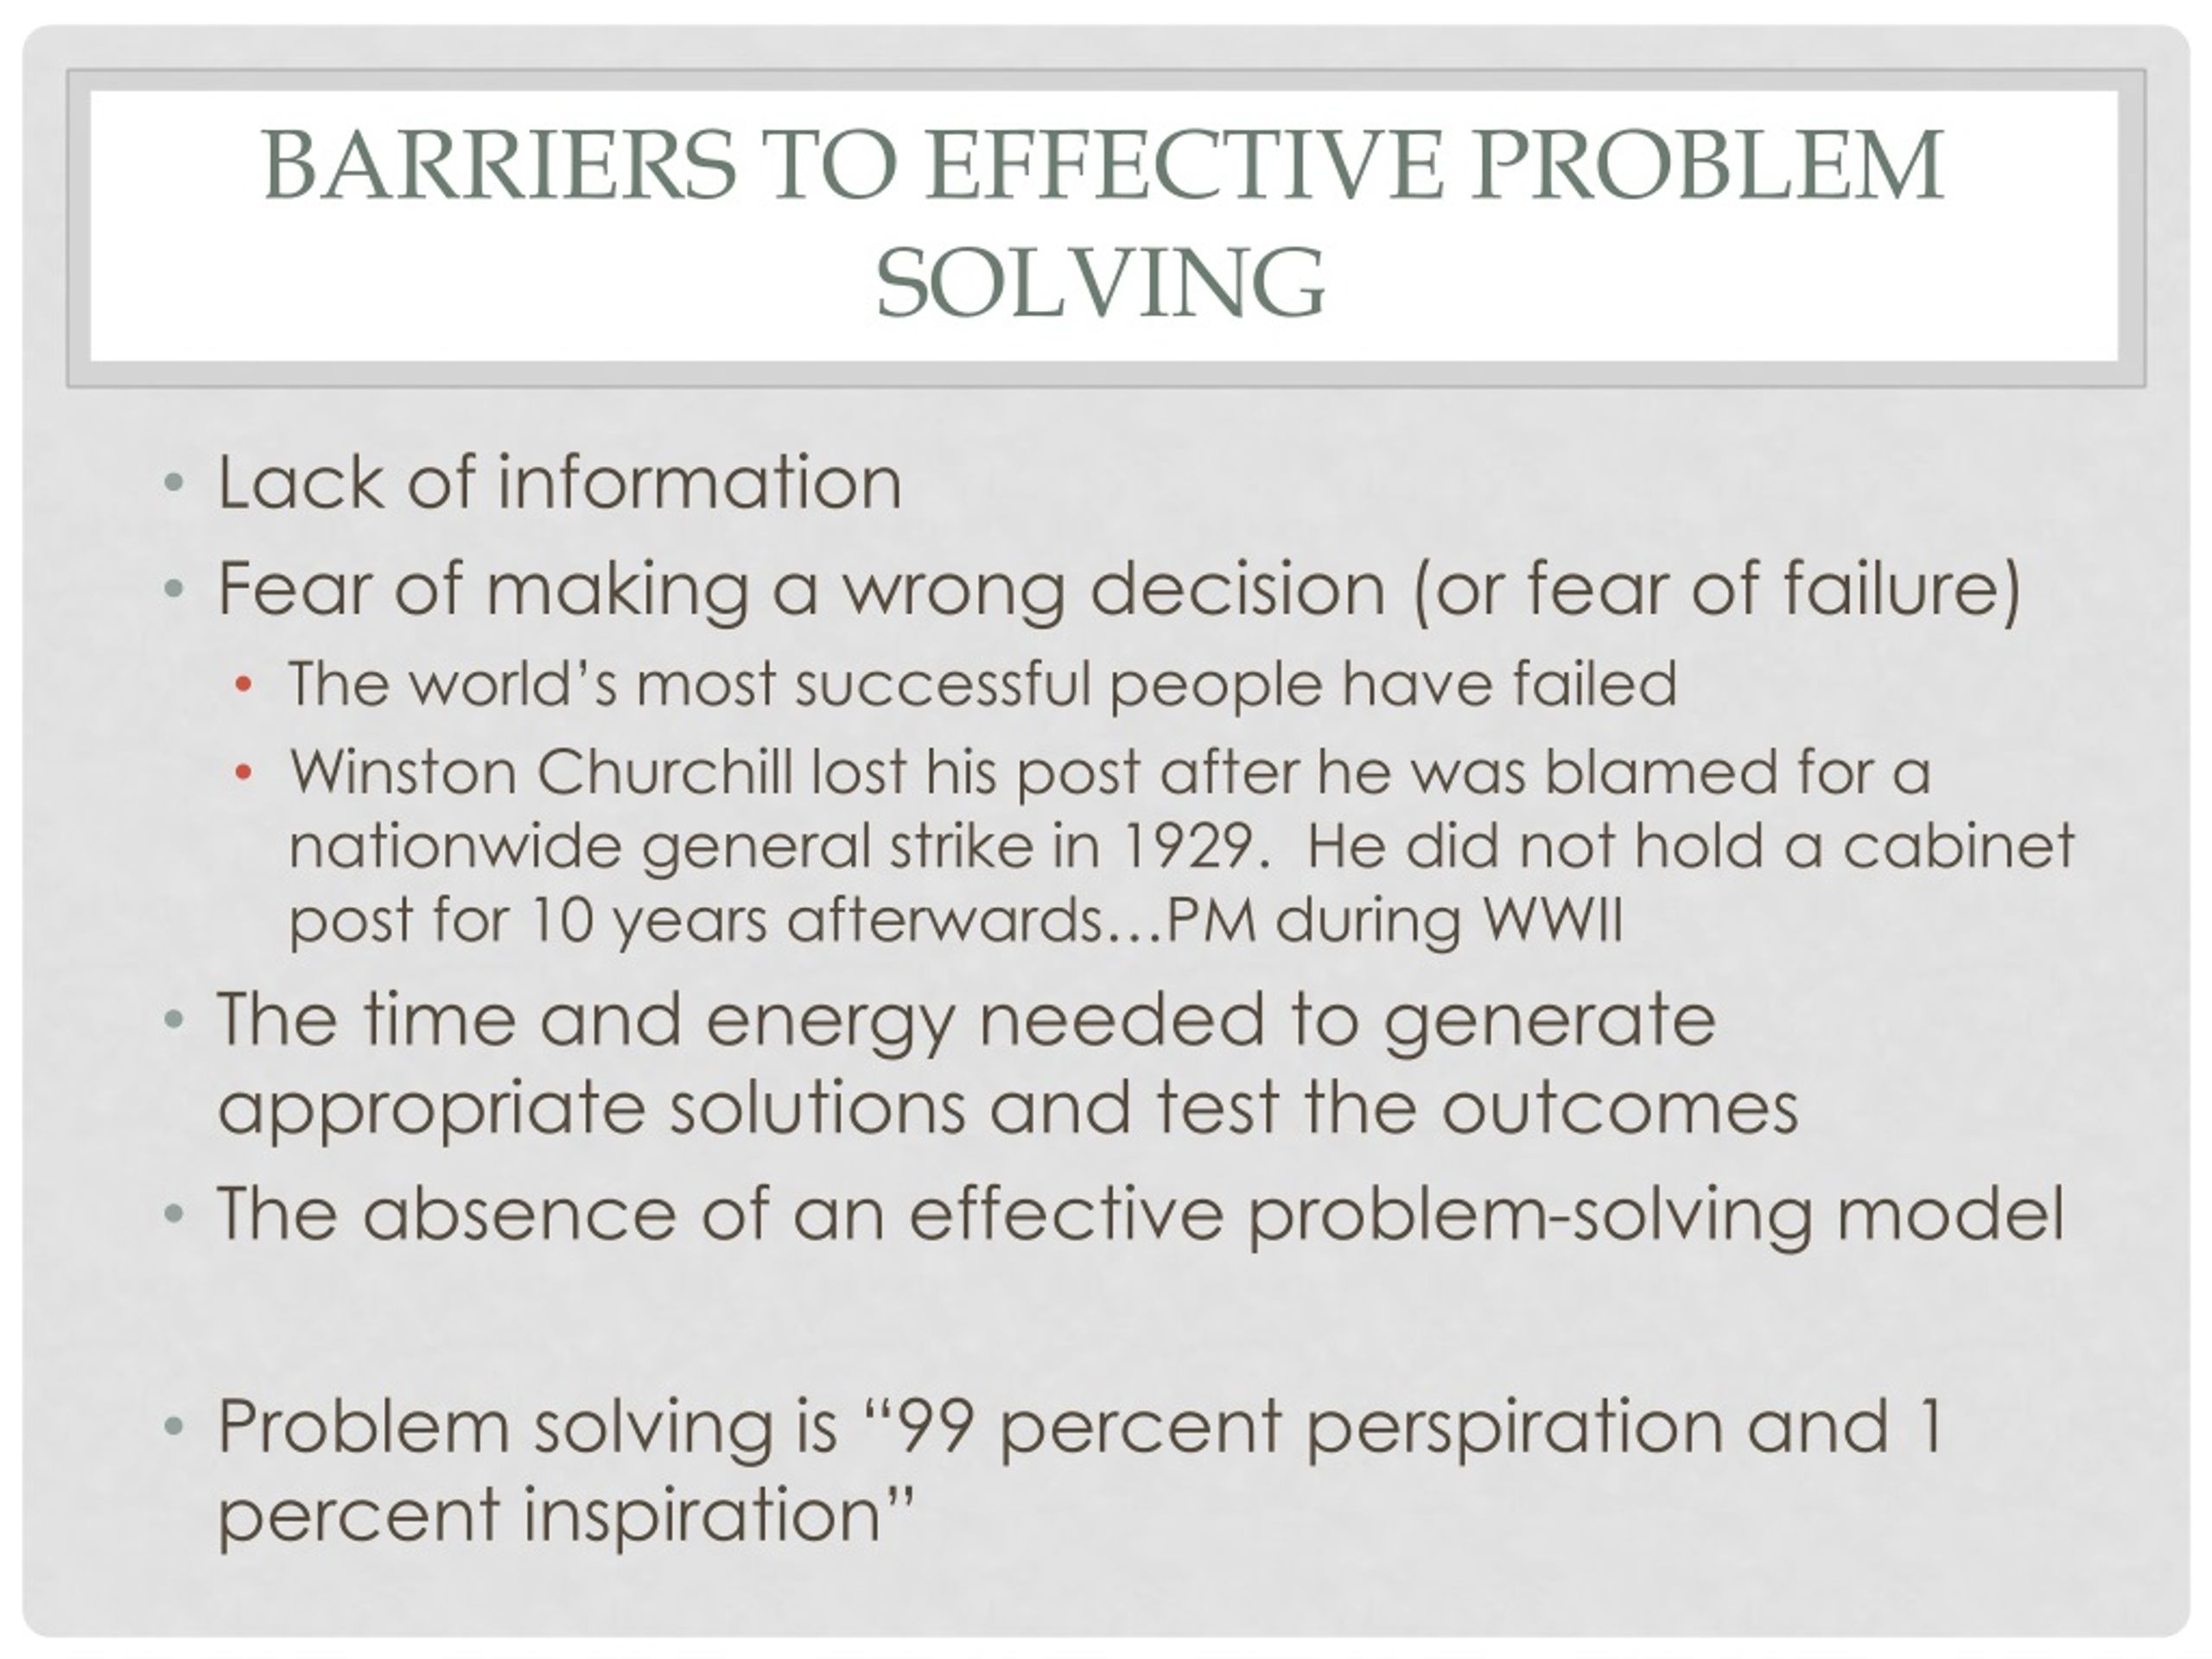 discuss the barriers of problem solving